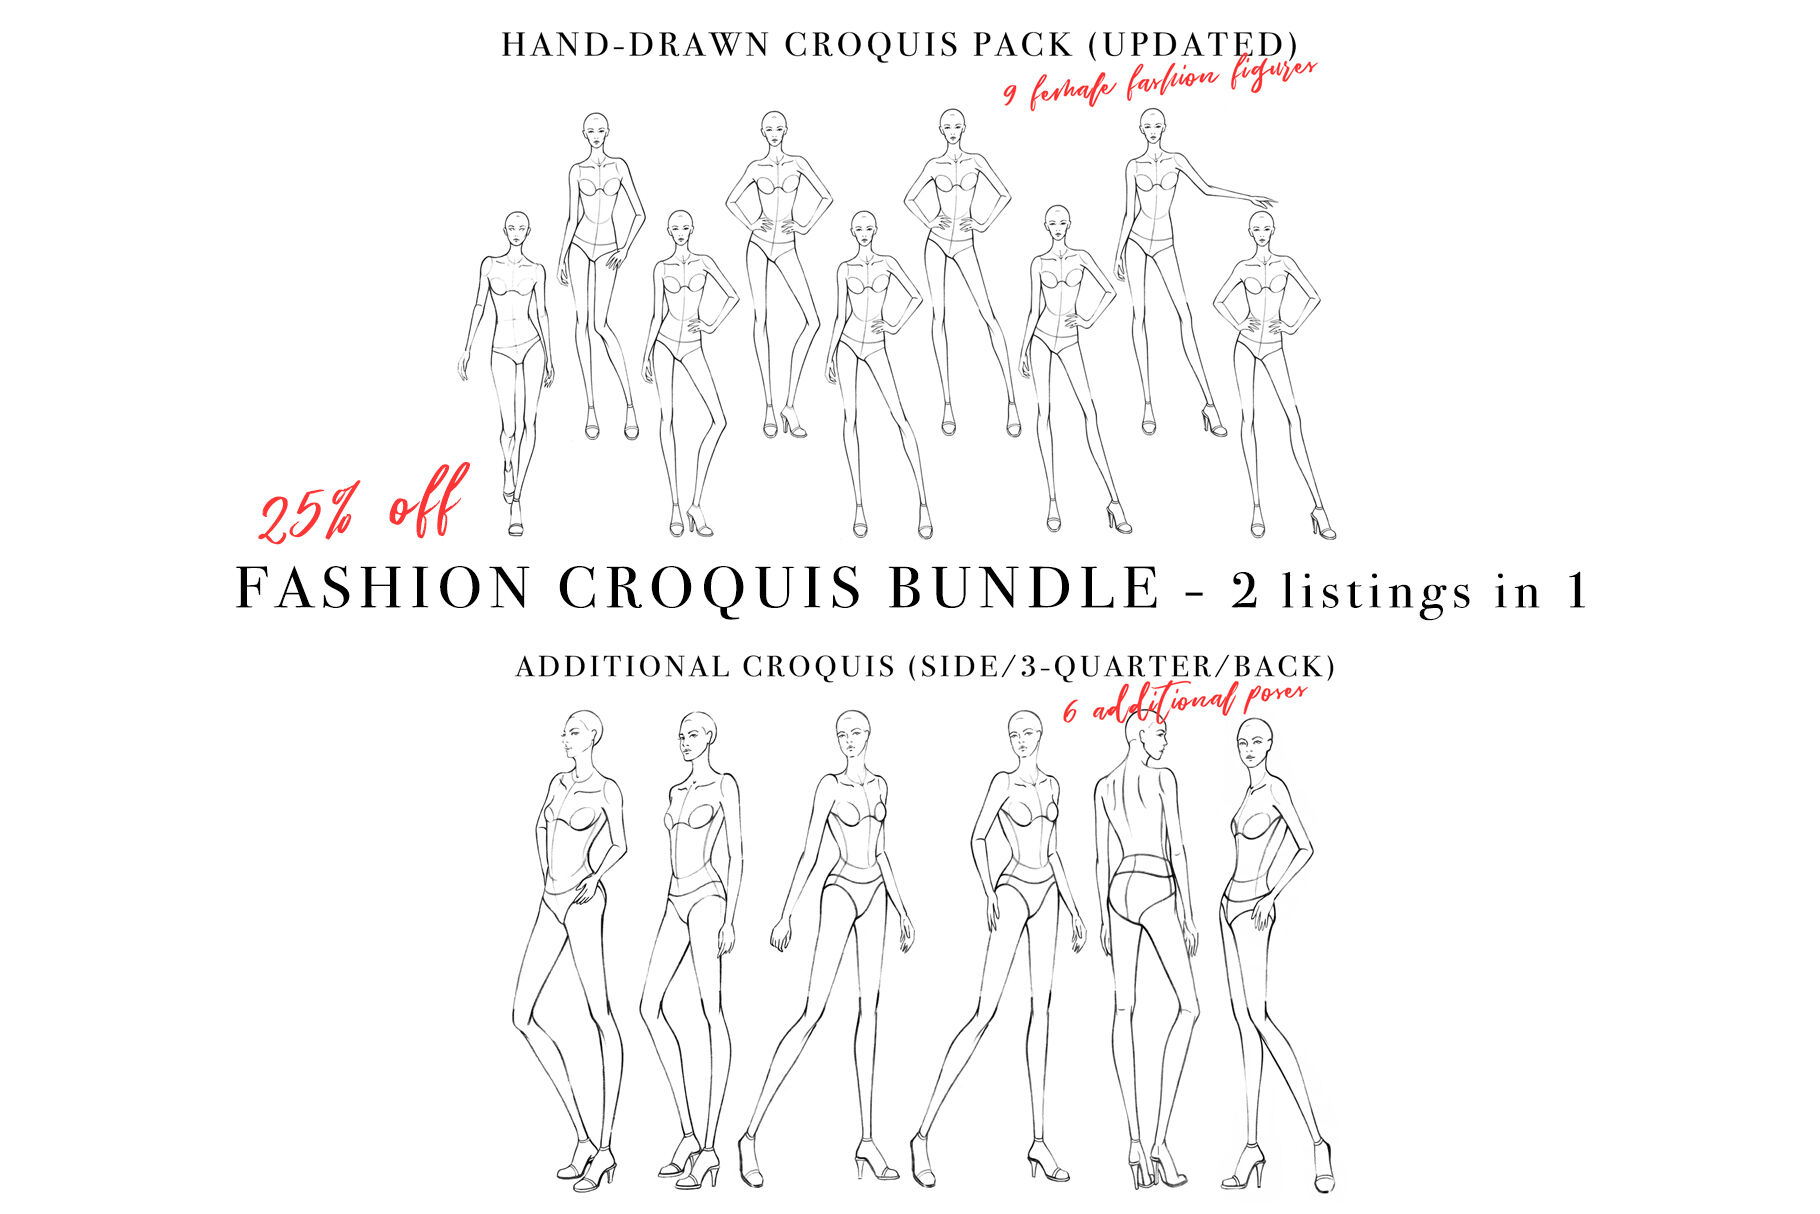 Buy FASHION DESIGN Croquis Pose Pack Online in India - Etsy